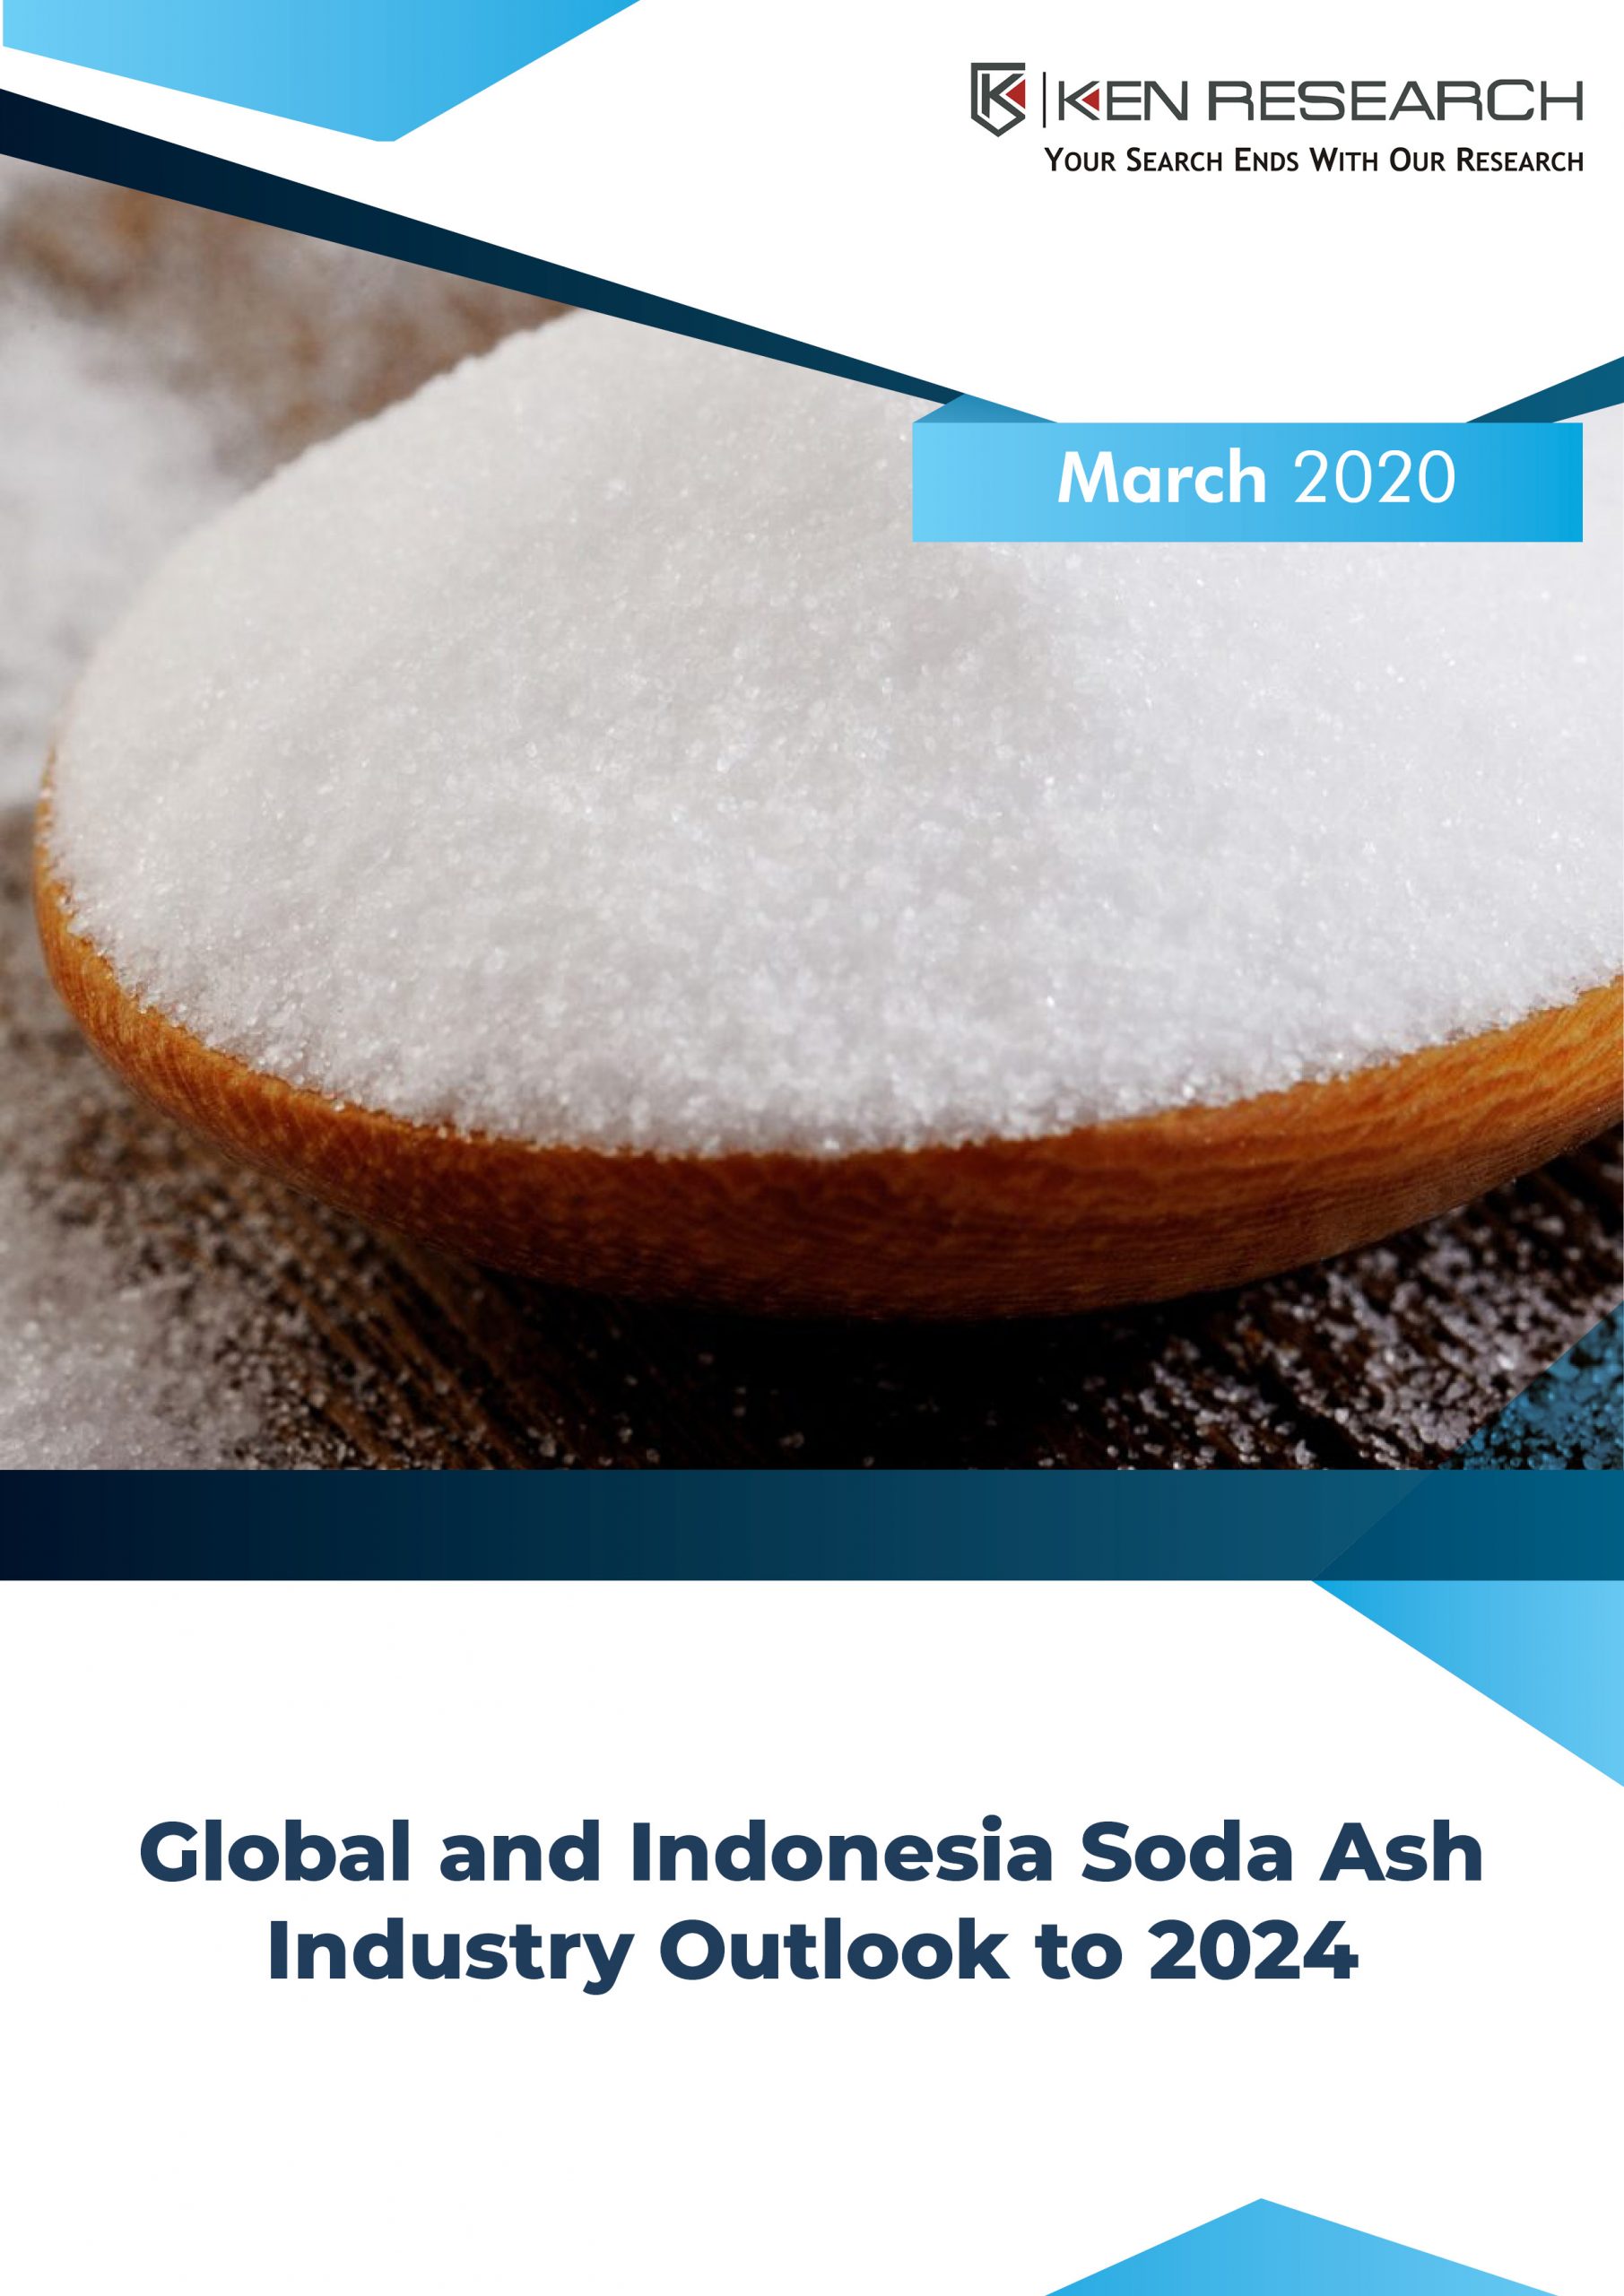 Global and Indonesia Soda Ash Industry